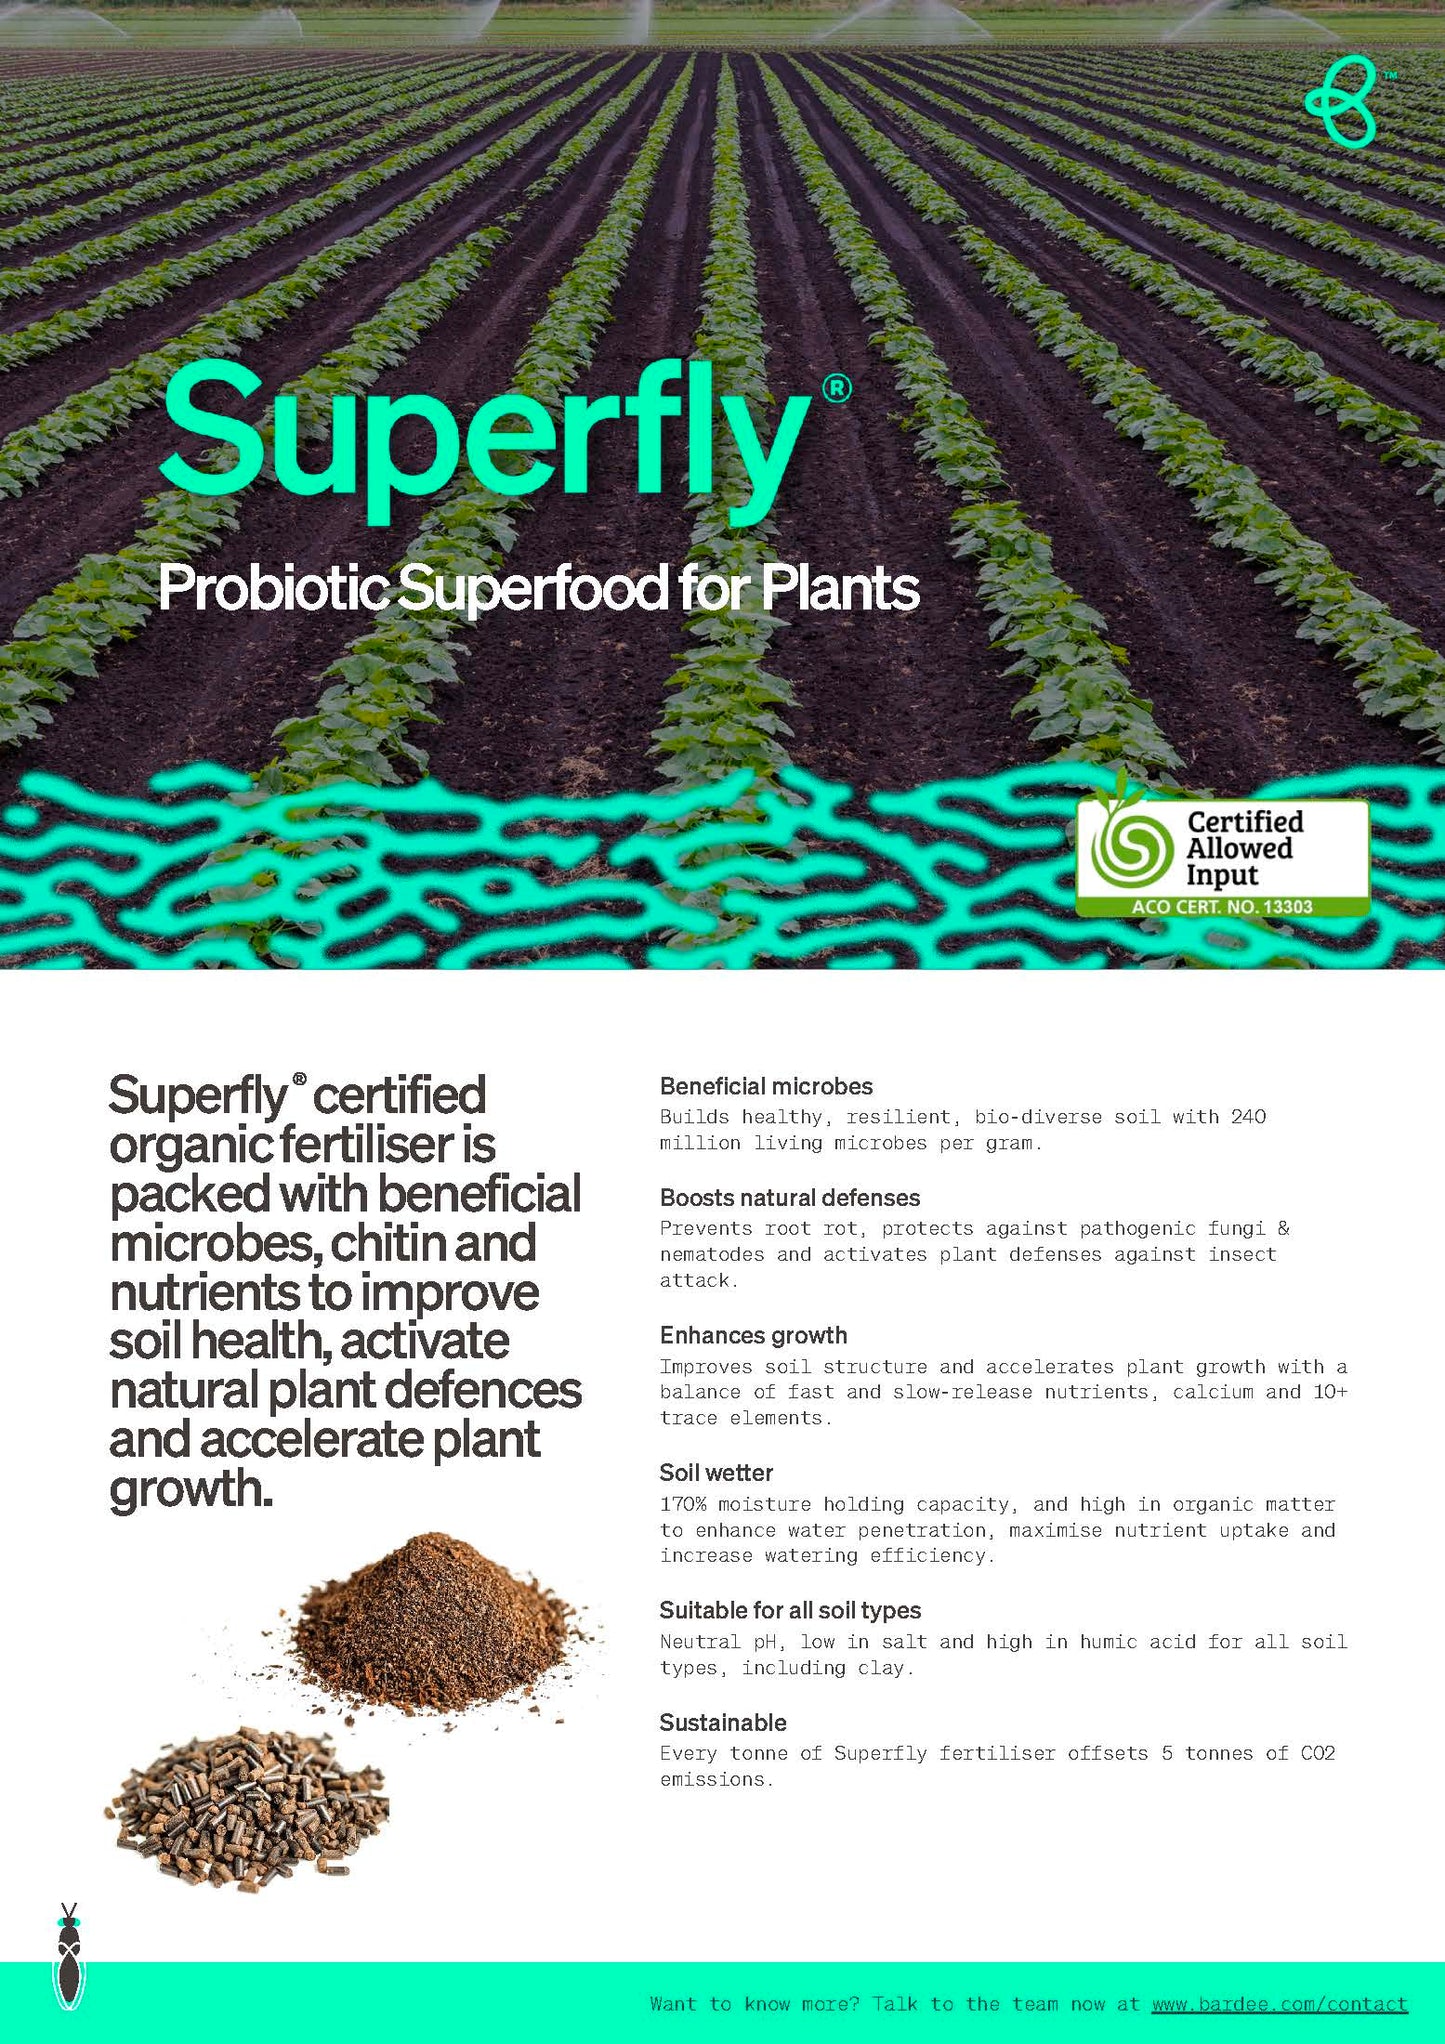 Superfly - Probiotic superfood for plants